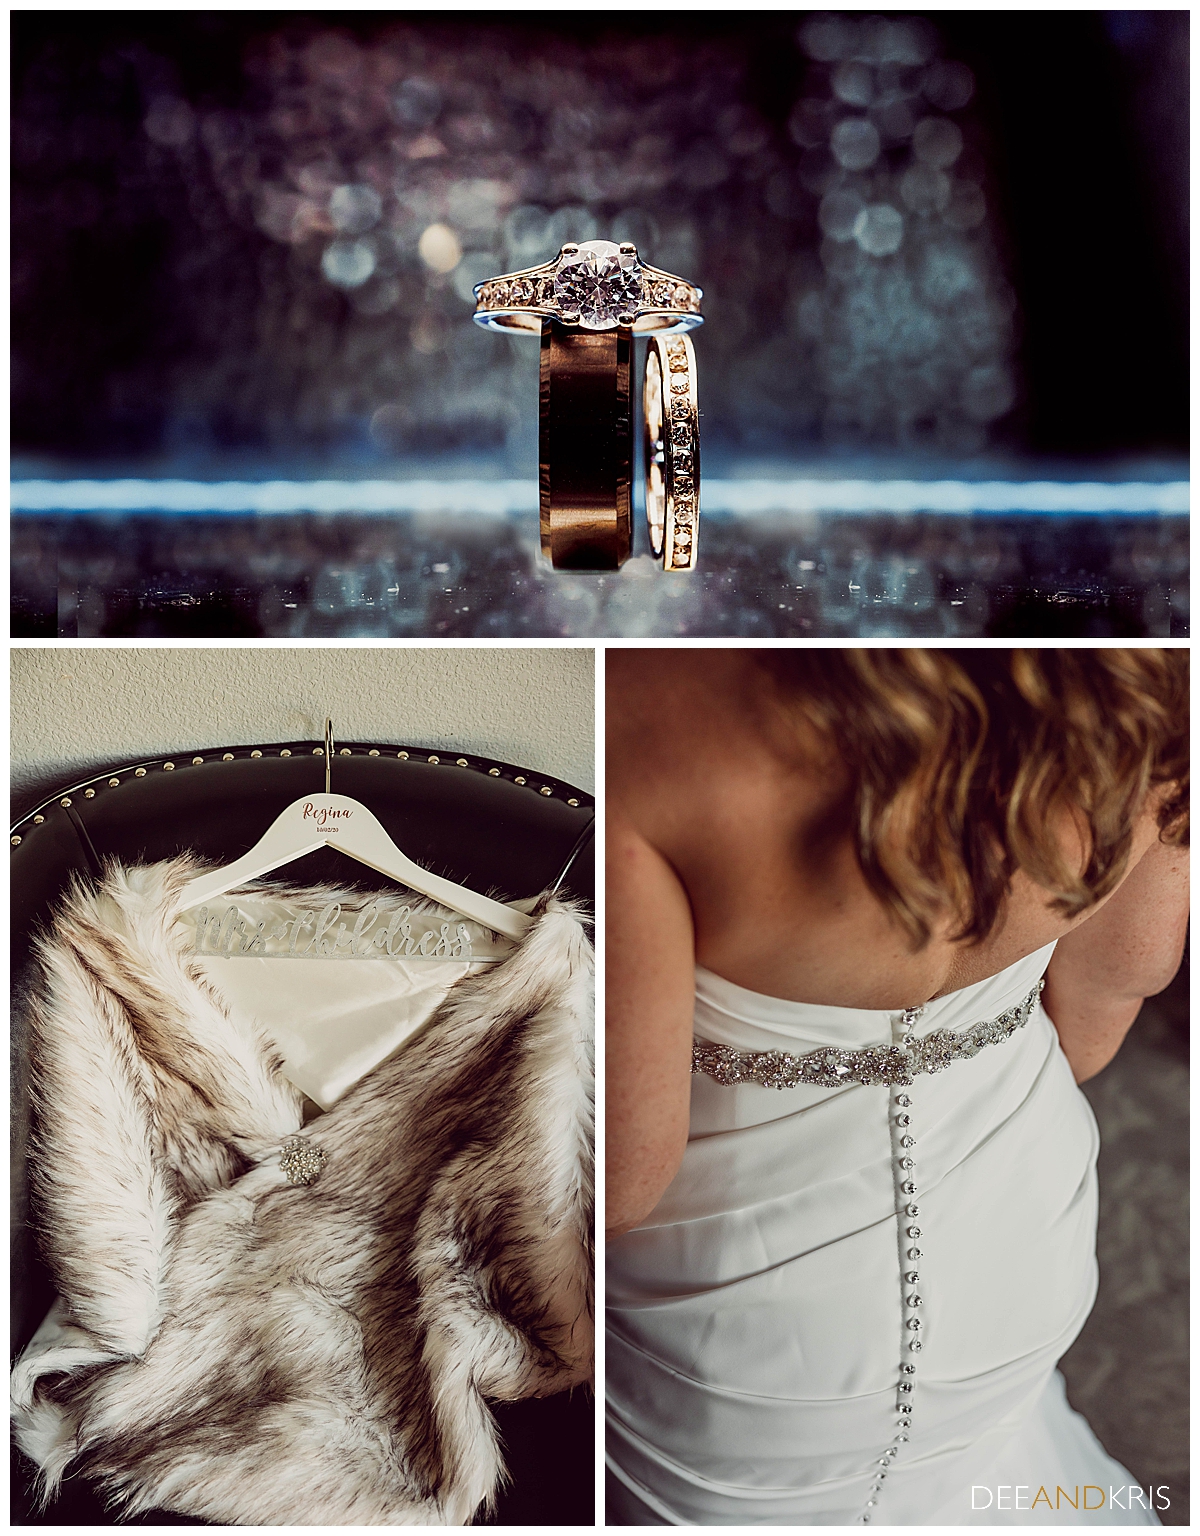 Three images: top image of wedding rings in front of out of focus backdrop. Bottom left image of bride's faux fur shoulder wrap on hanger. Bottom right image of back buttons of bride's gown.